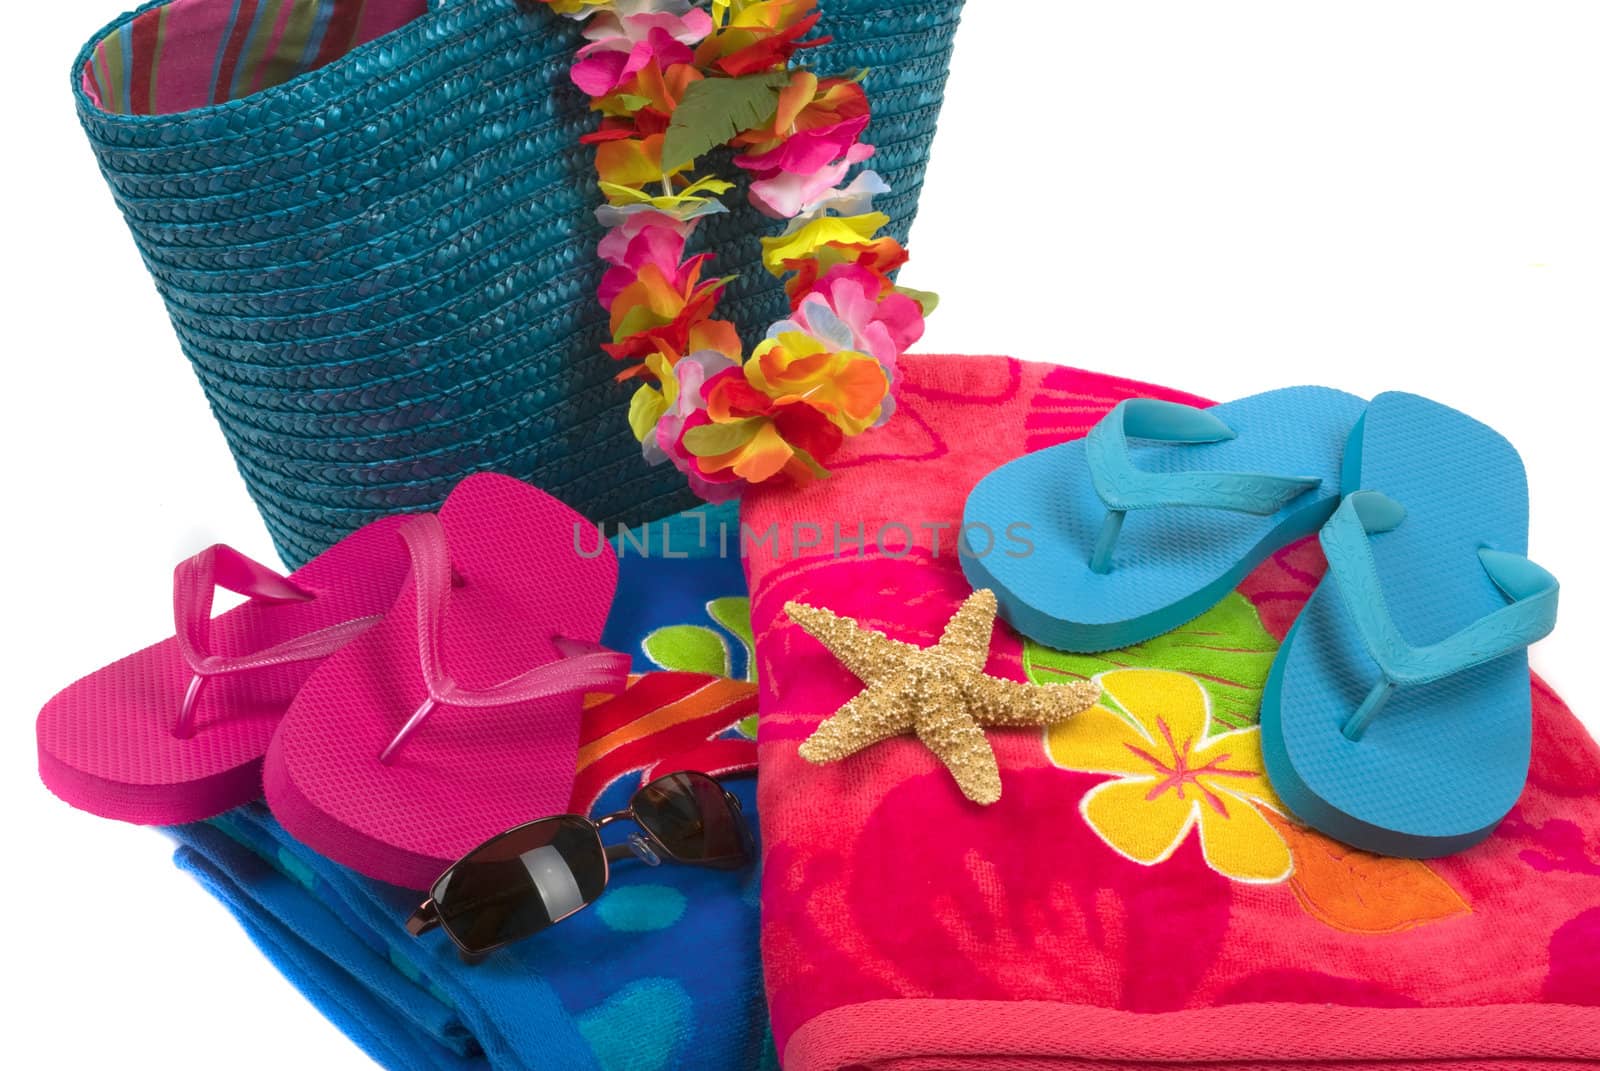 Colorful summer beachwear, flipflops, hat, orchids, sunglasses, towels, beach bag, and starfish